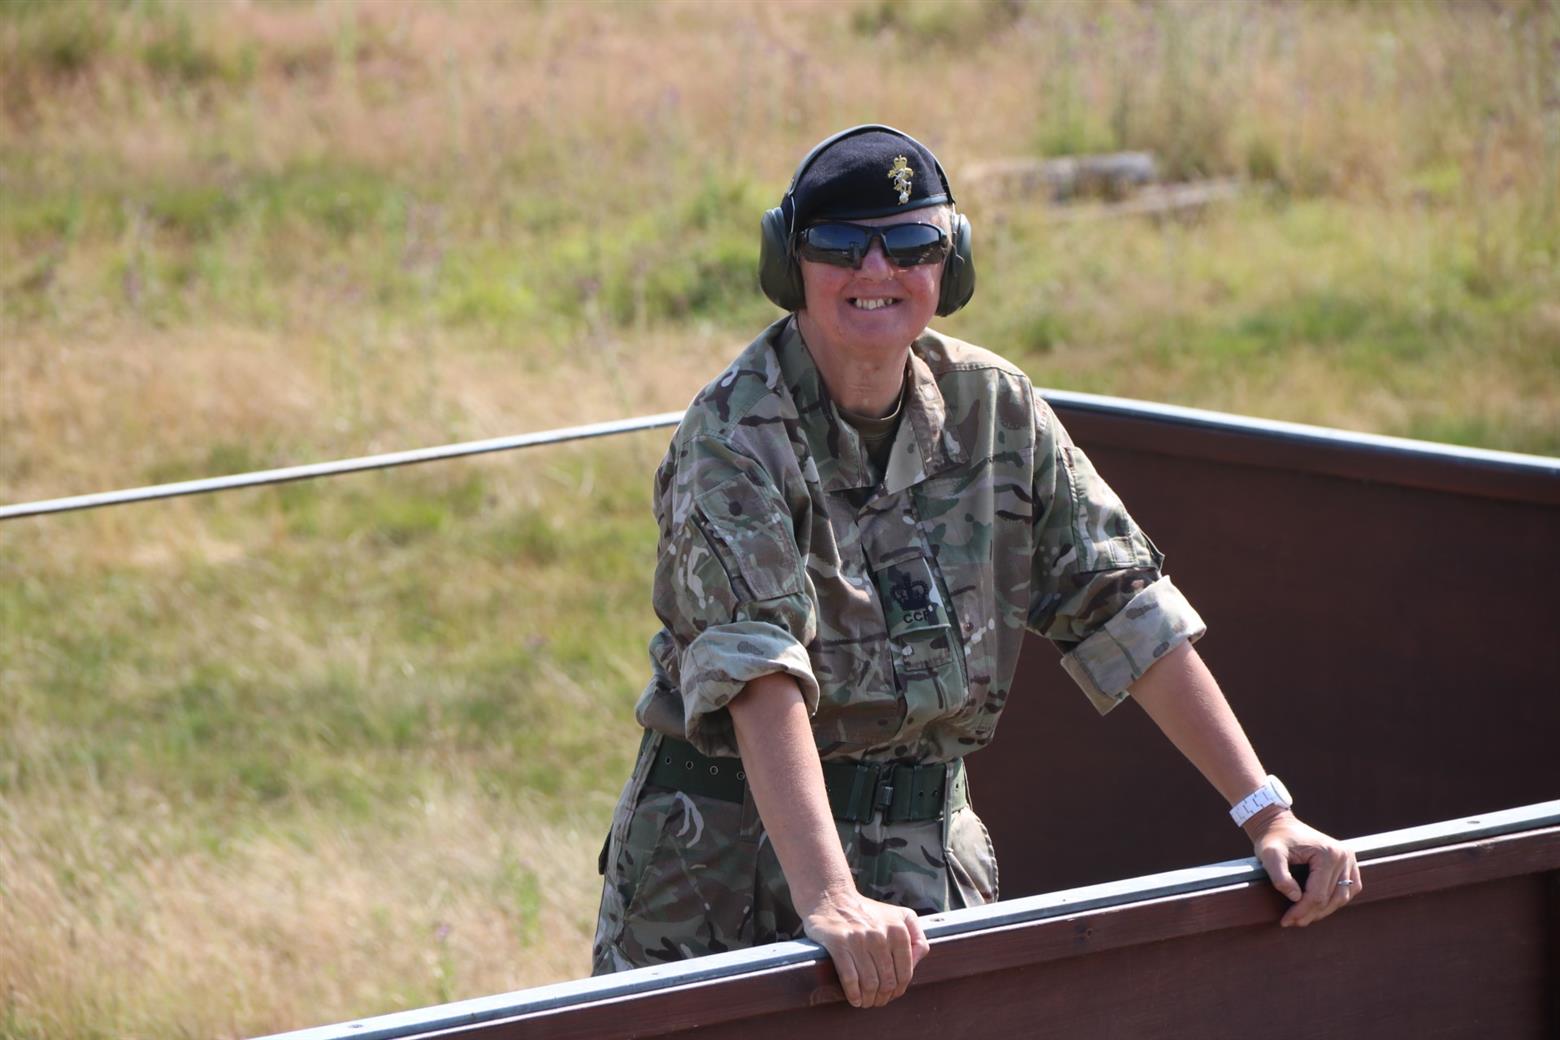 A Veteran's point of view by WO2 Sharon Hobson Woodhead